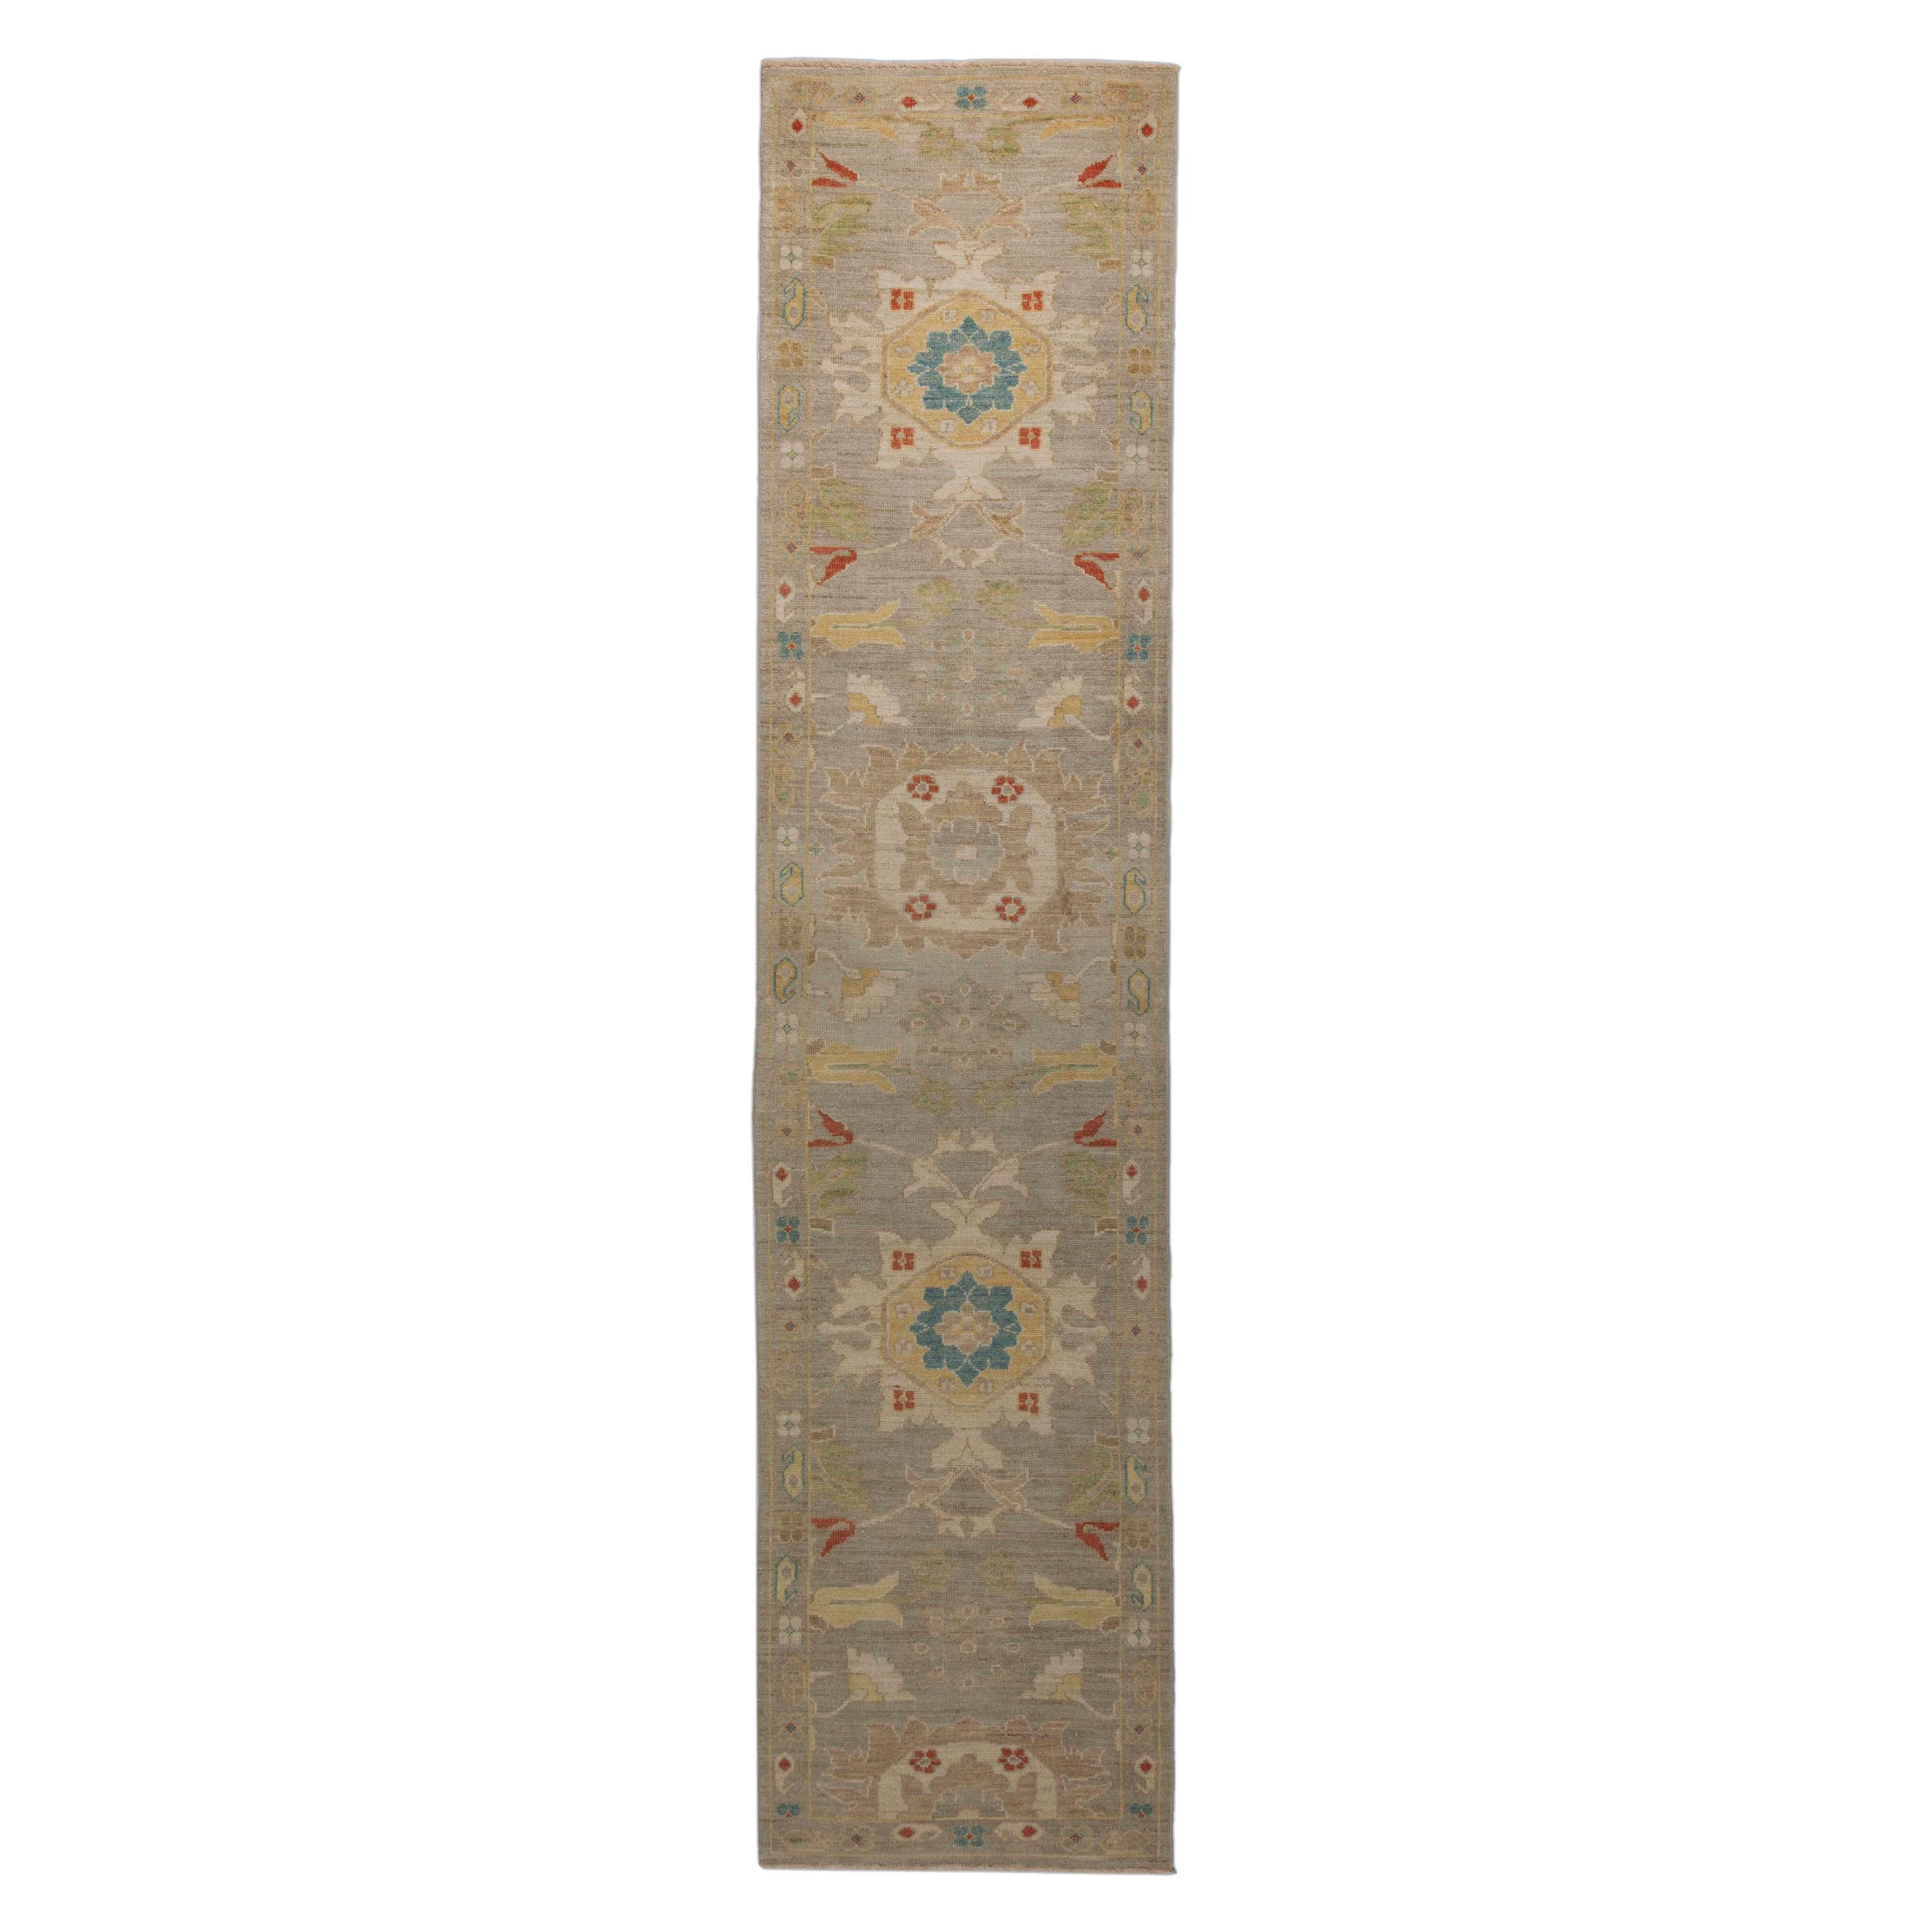 Contemporary Turkish Runner Rug with Sultanabad Woven Floral Patterns